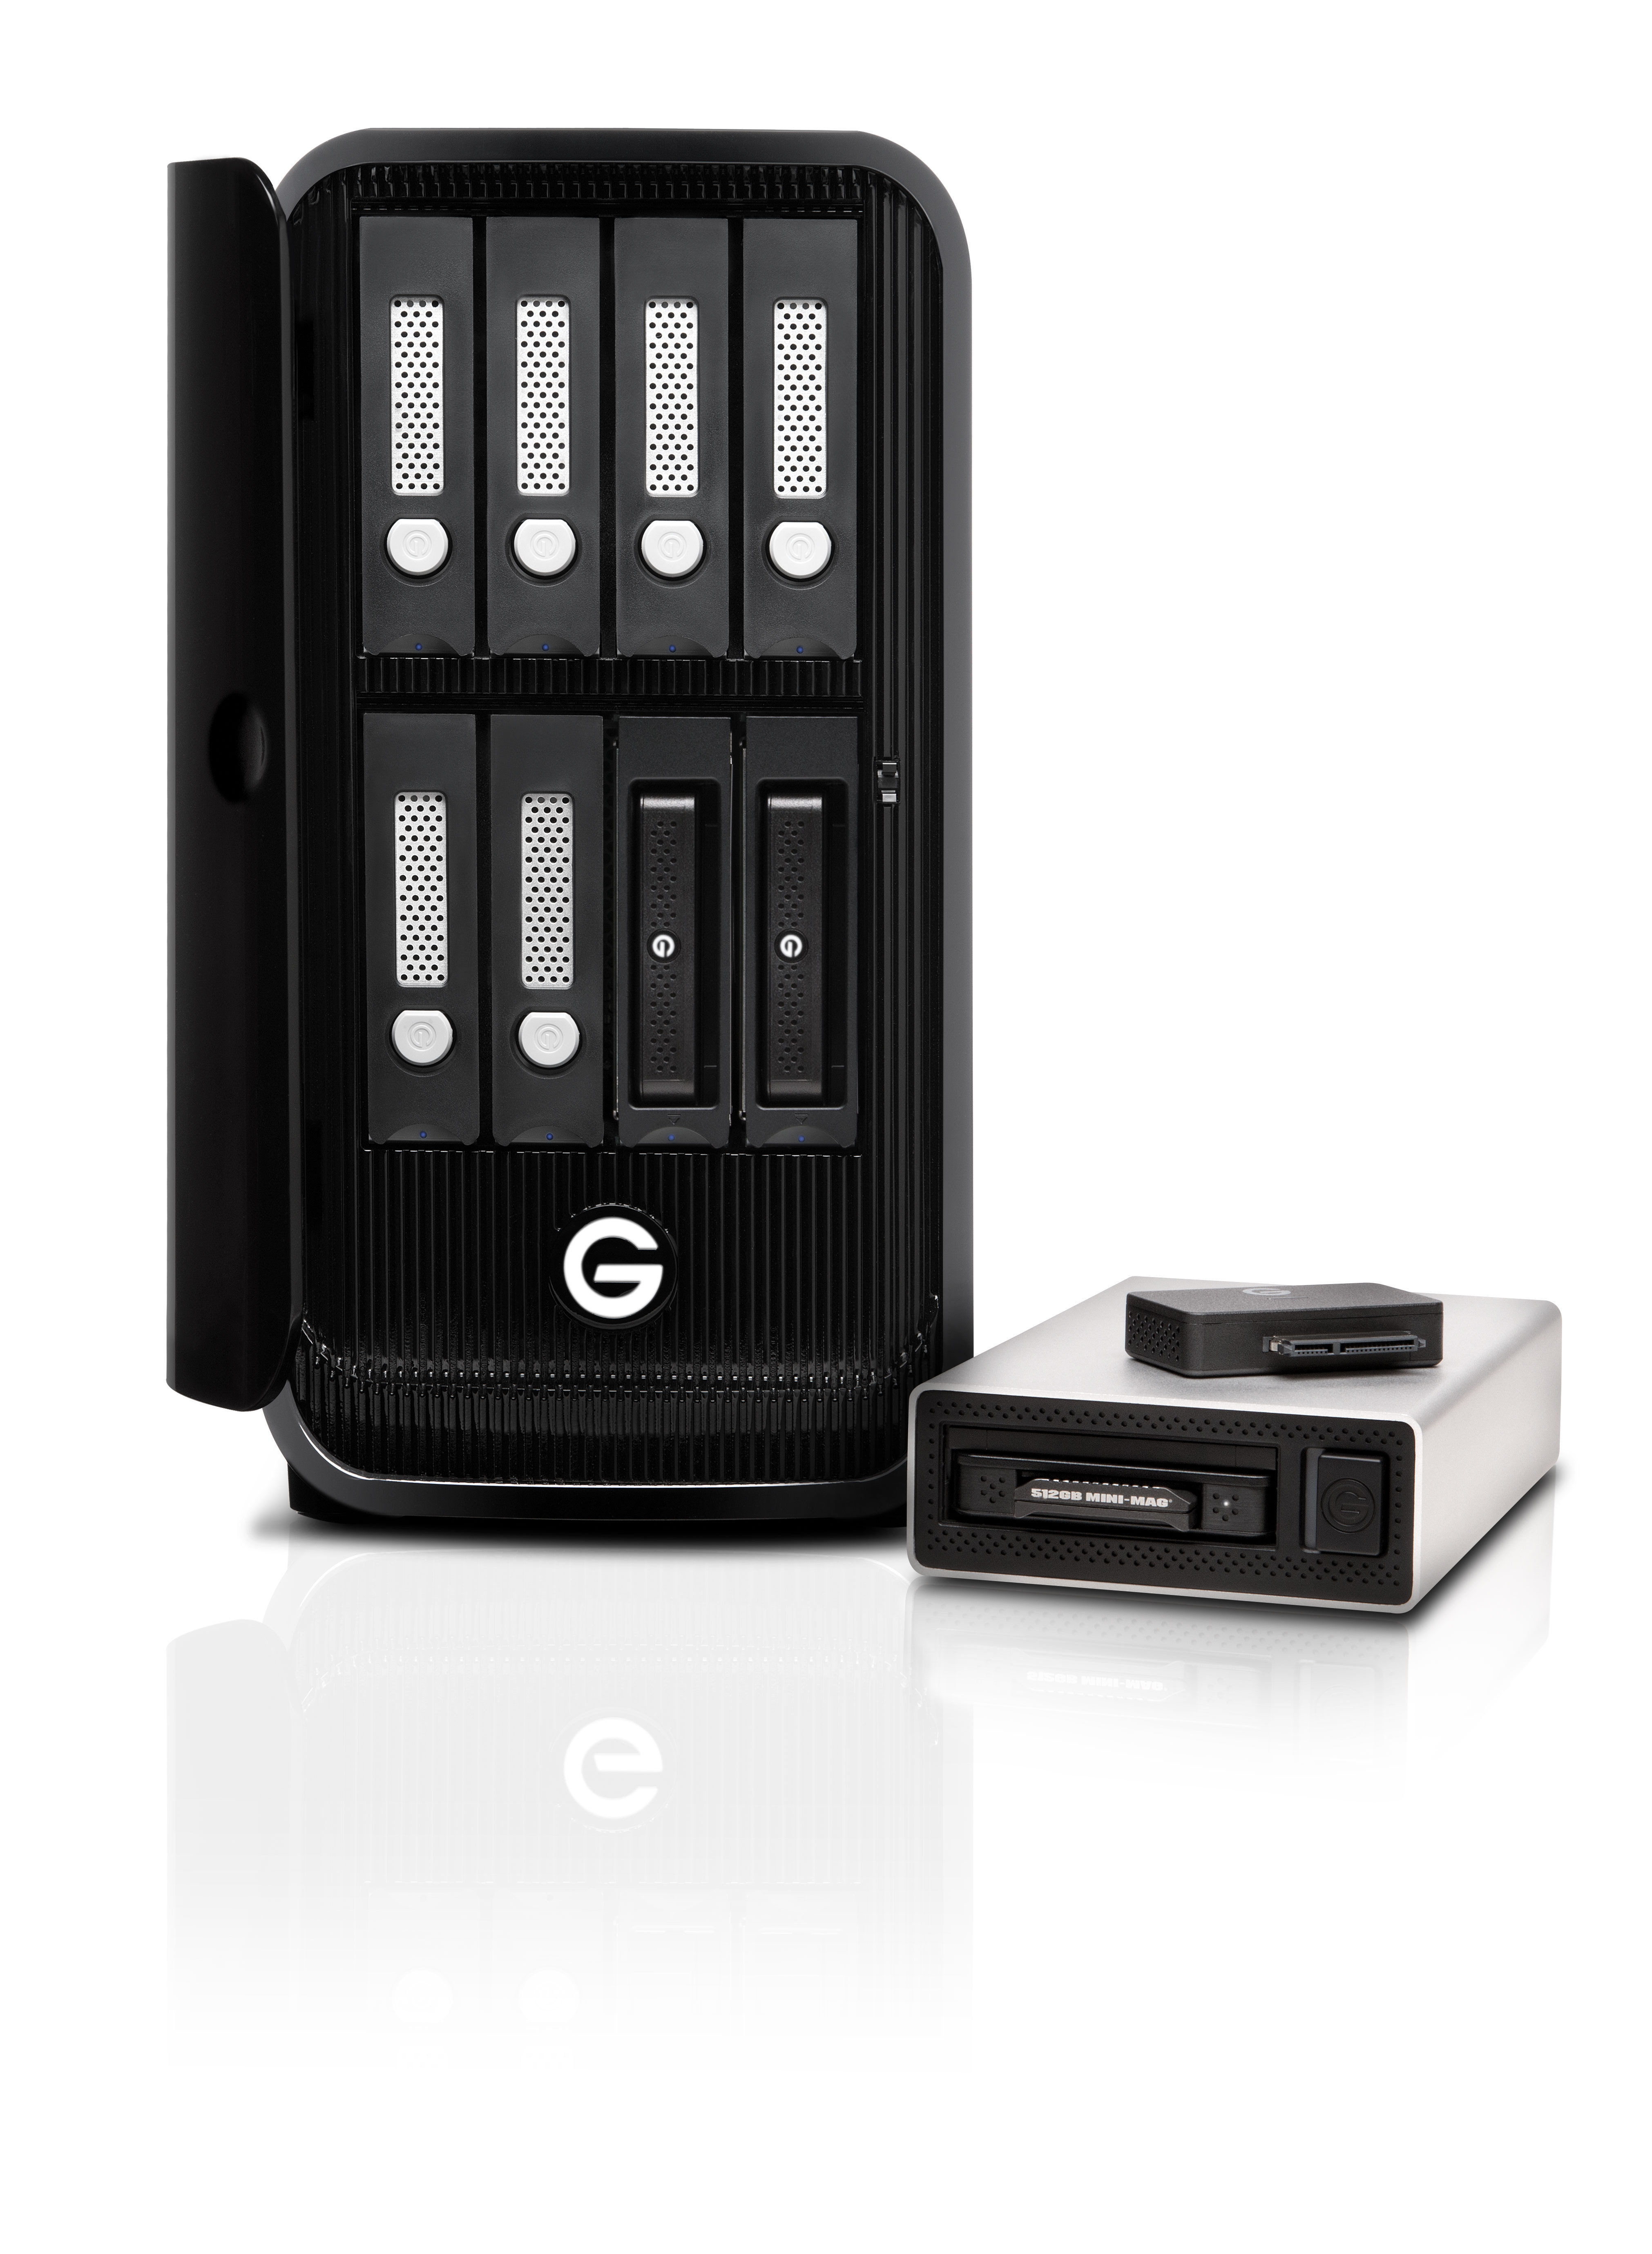 G-Technology Shows Off New Products, Including a New G-Studio & RED Mini-Mag Reader